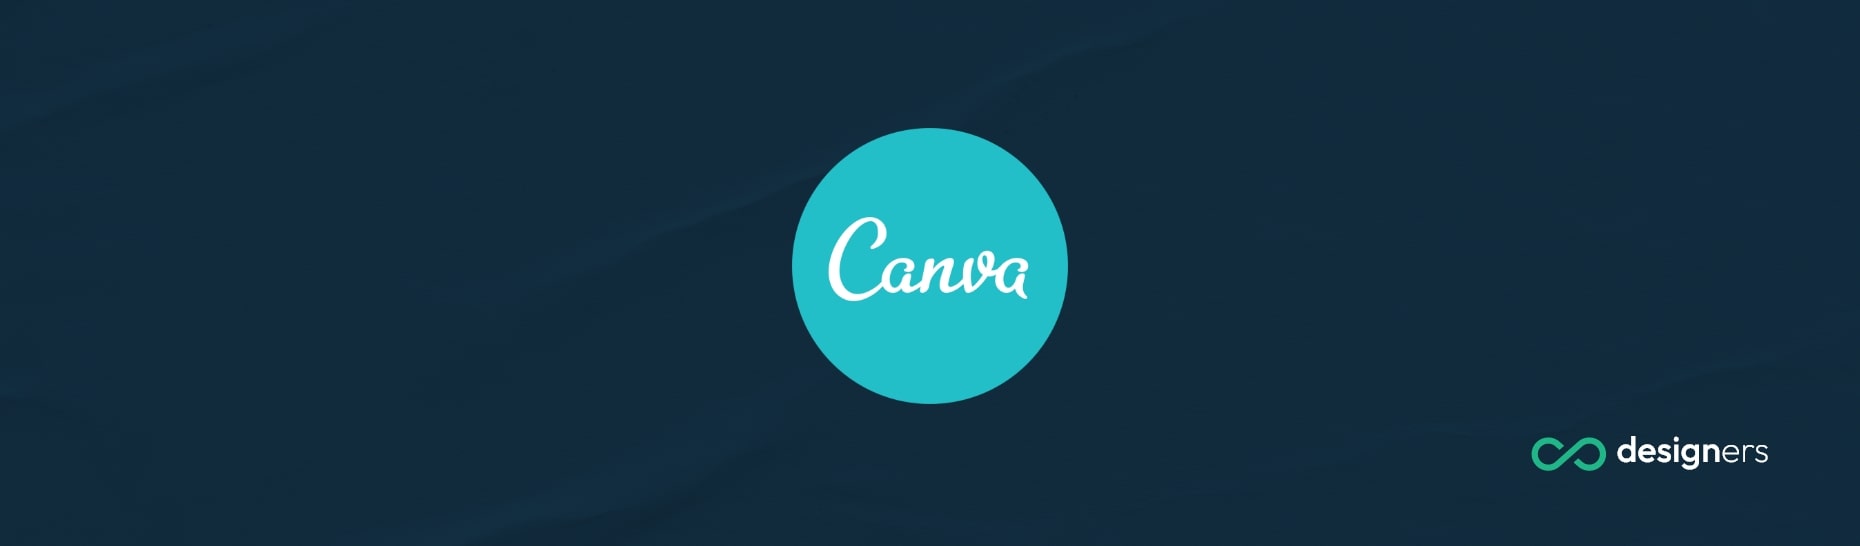 Is Canva free for non-profits?